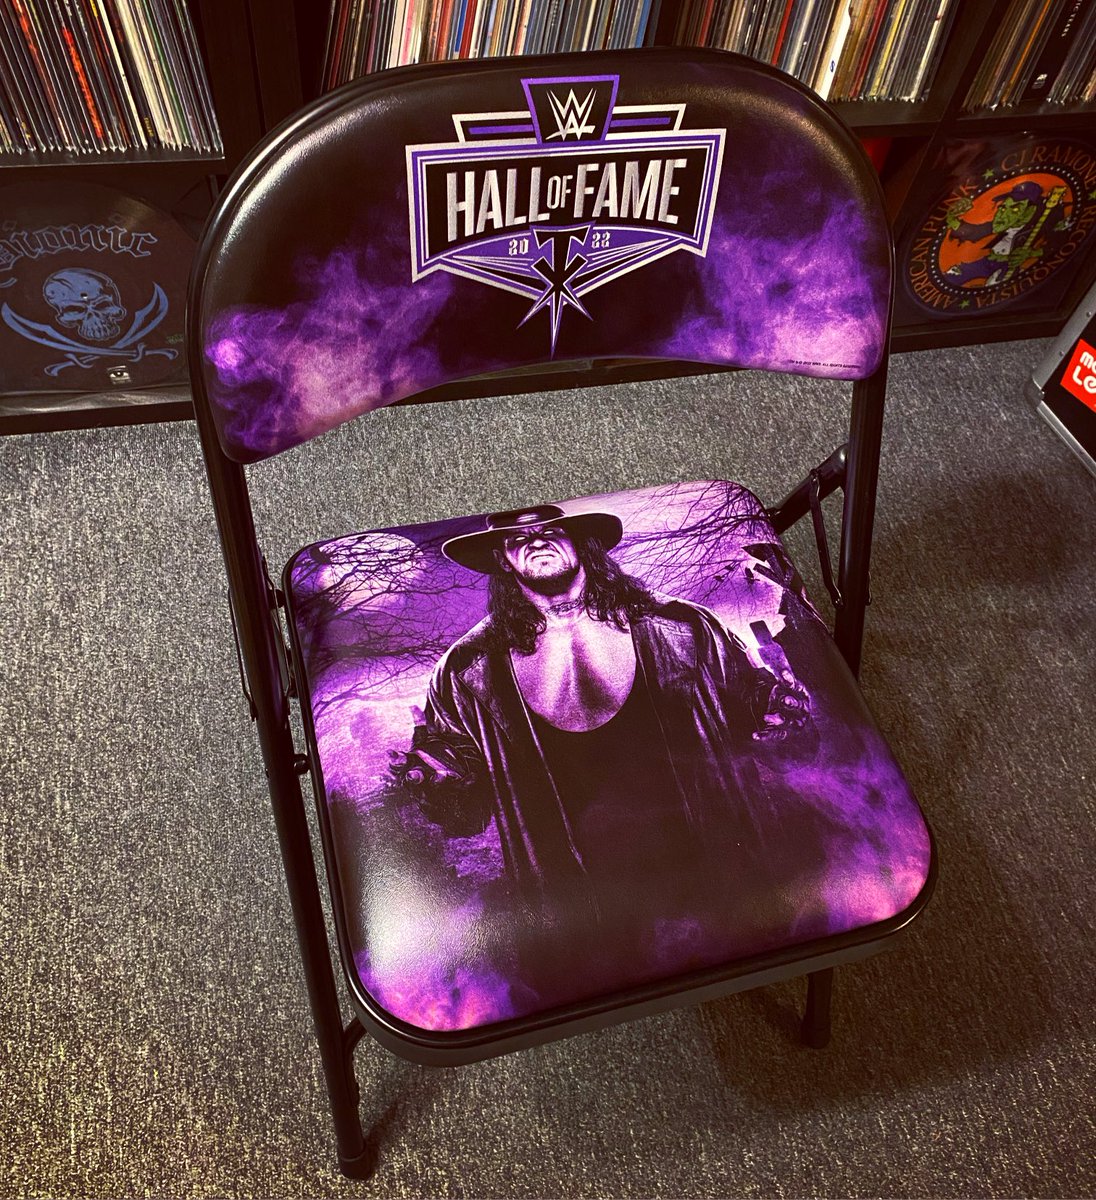 Thanks to my buddy Mark for this chair from the Undertaker’s WWE Hall of Fame Induction earlier this year. Wicked cool Christmas gift. 
#RestInPeace #Undertaker #WWEHallOfFame #ThankYouTaker #WrestlingChair